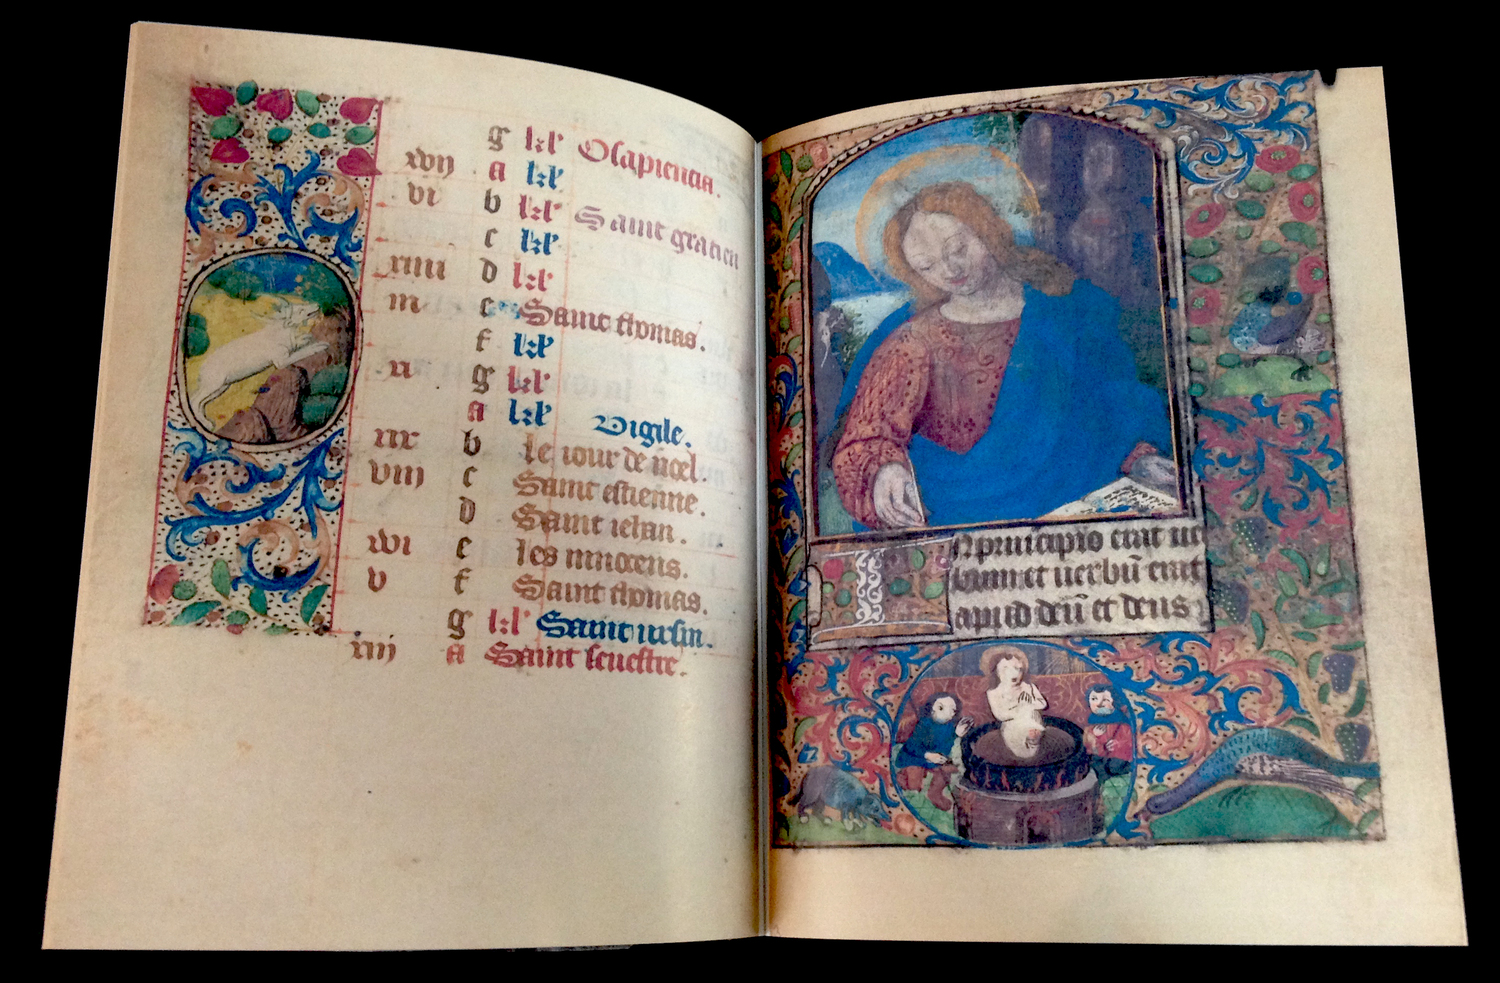 BOOK OF HOURS USE OF ORLÉANS, 1490